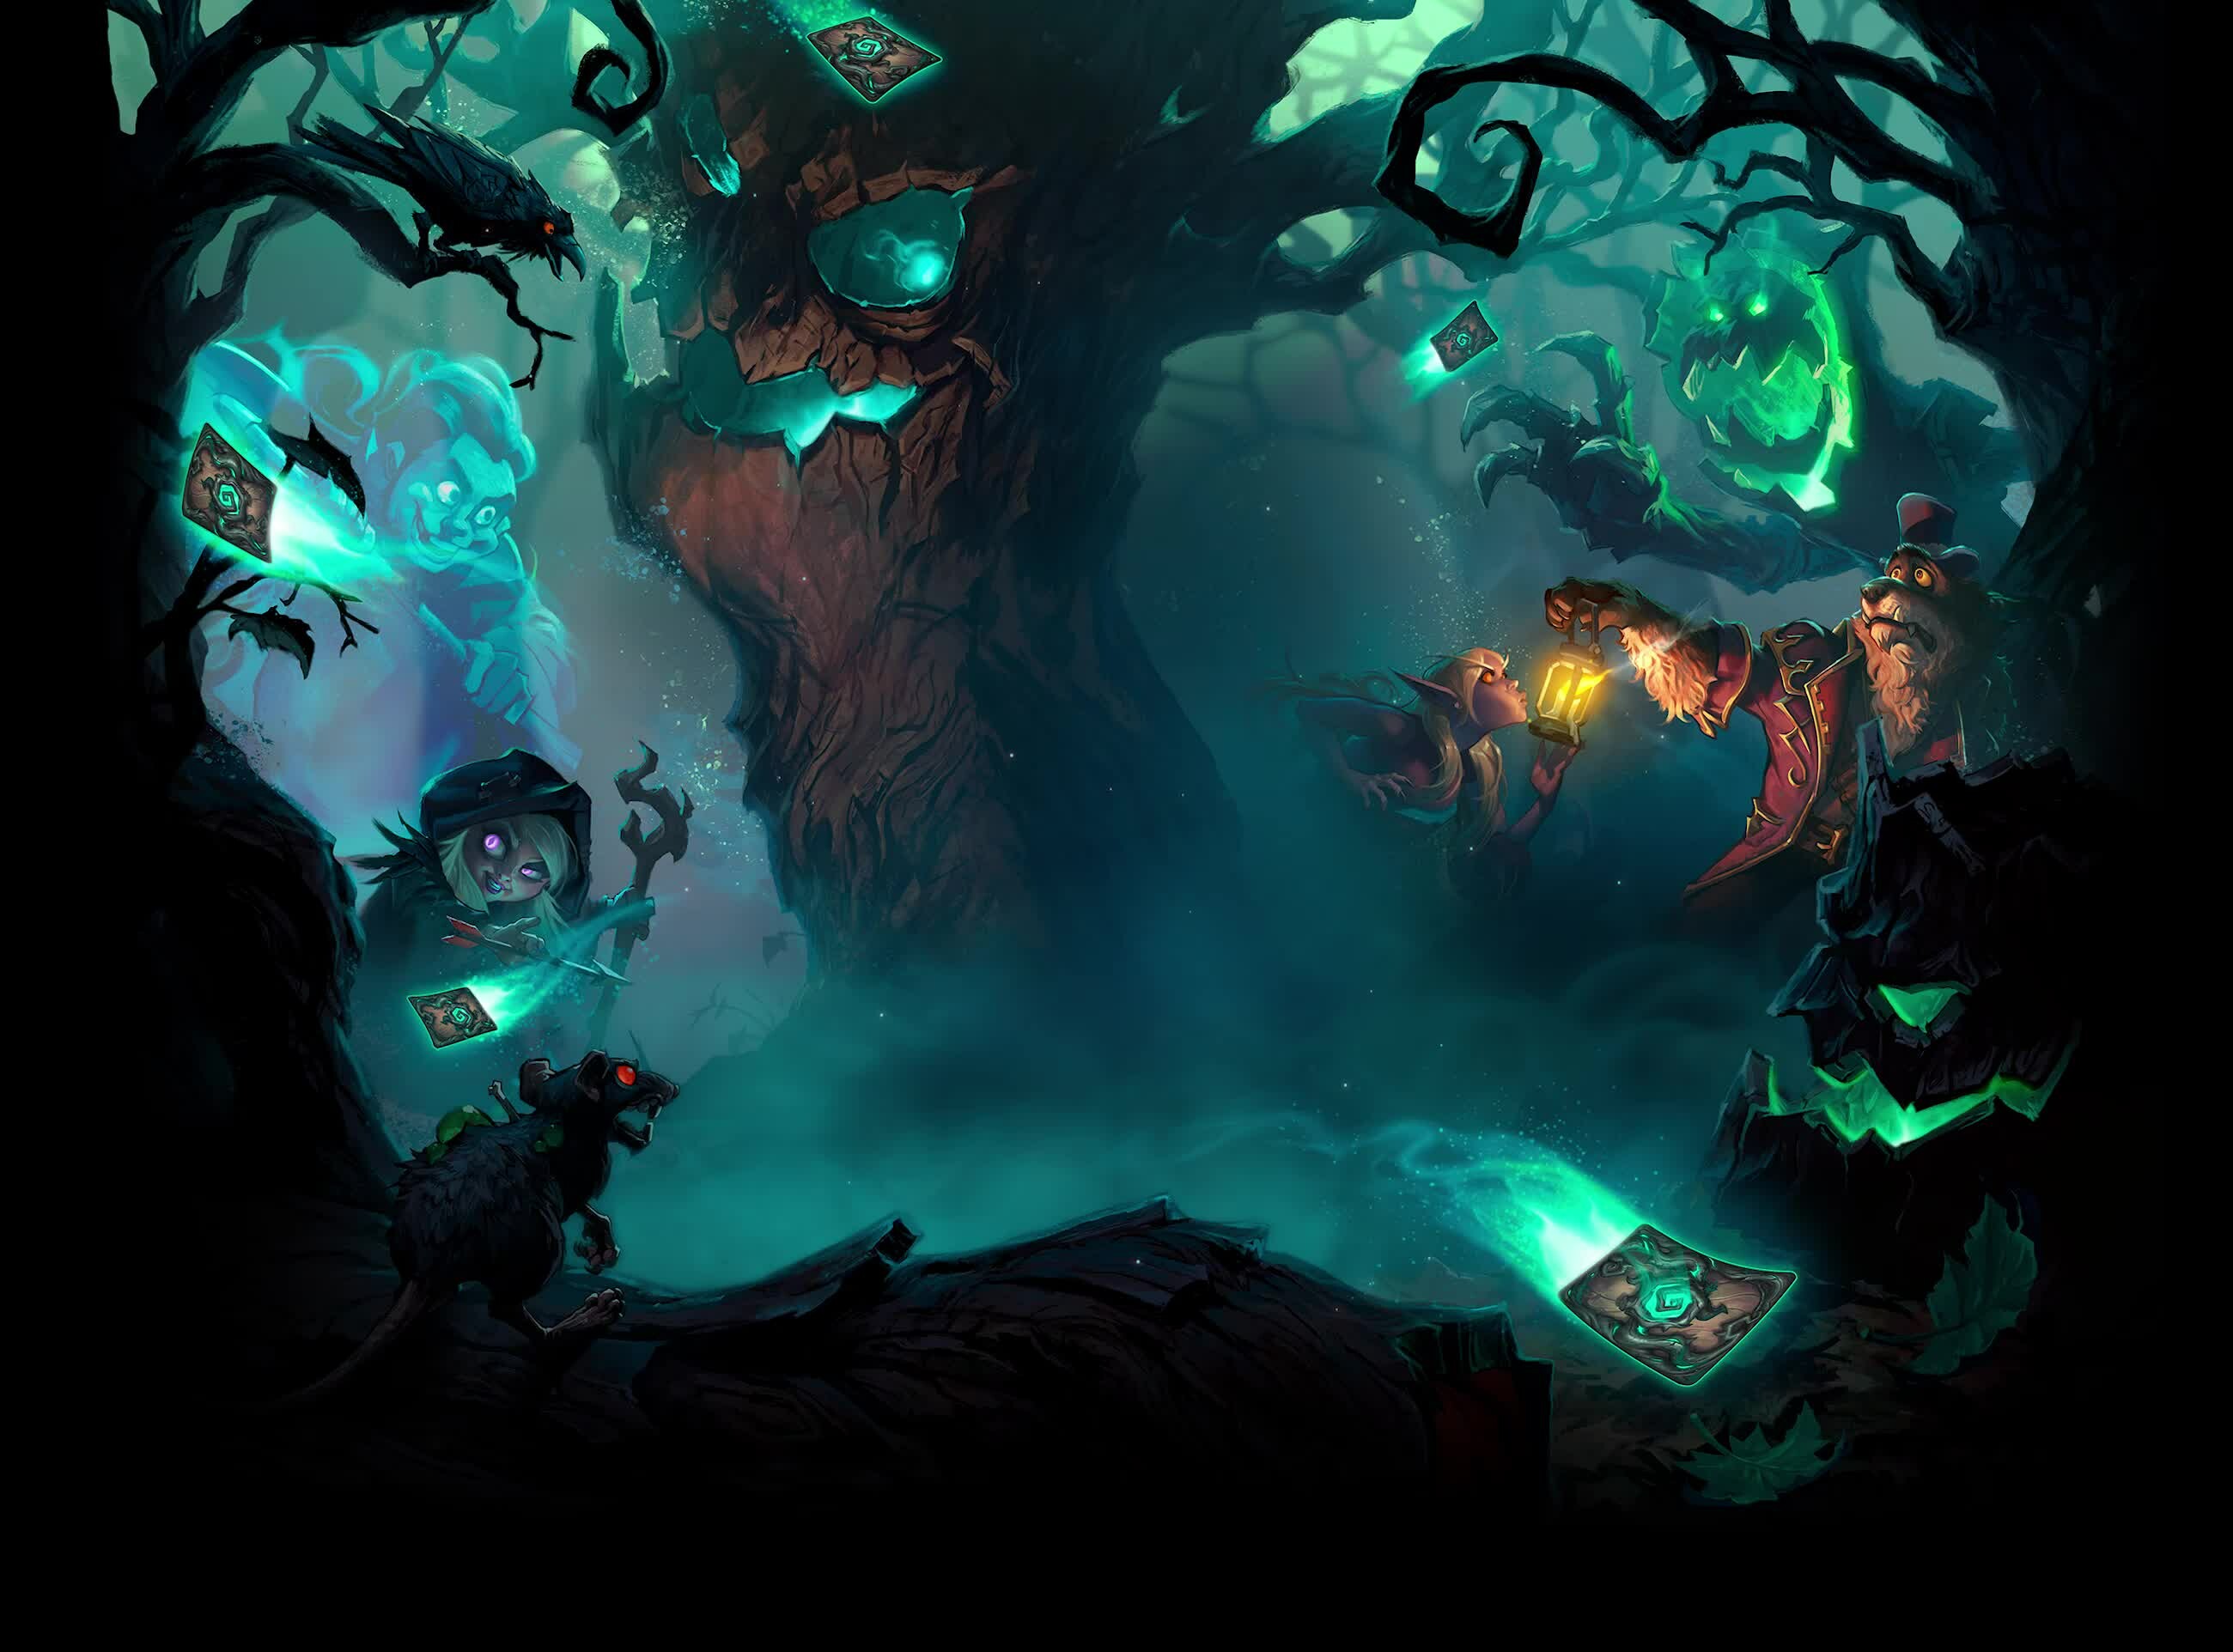 Hearthstone: The game has become popular as an esport, with cash prize tournaments hosted by Blizzard and other organizers. 2600x1930 HD Background.